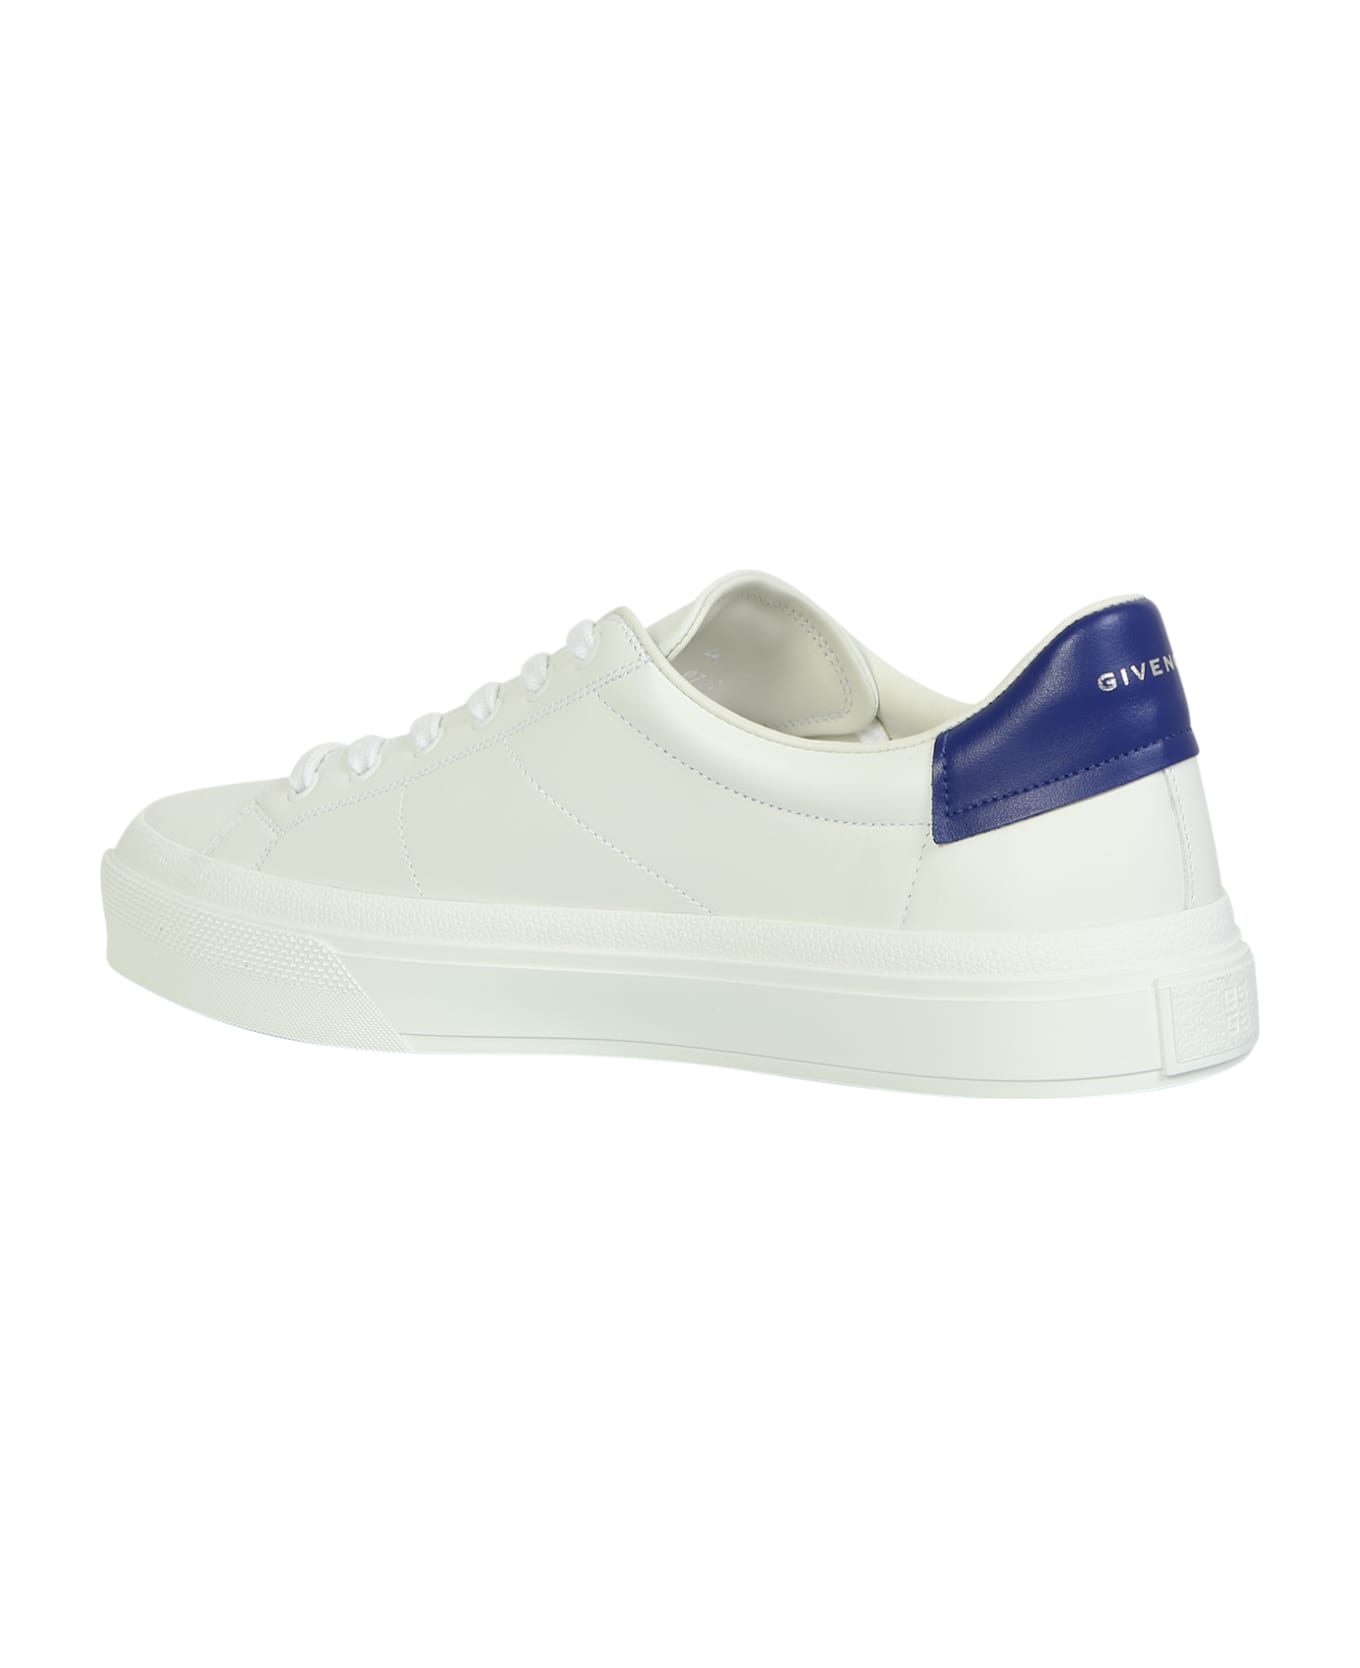 Givenchy City Court Sneakers By Are A Model That Characterizes The New Collection As They Are Inspired By The Tennis Court - White Blue